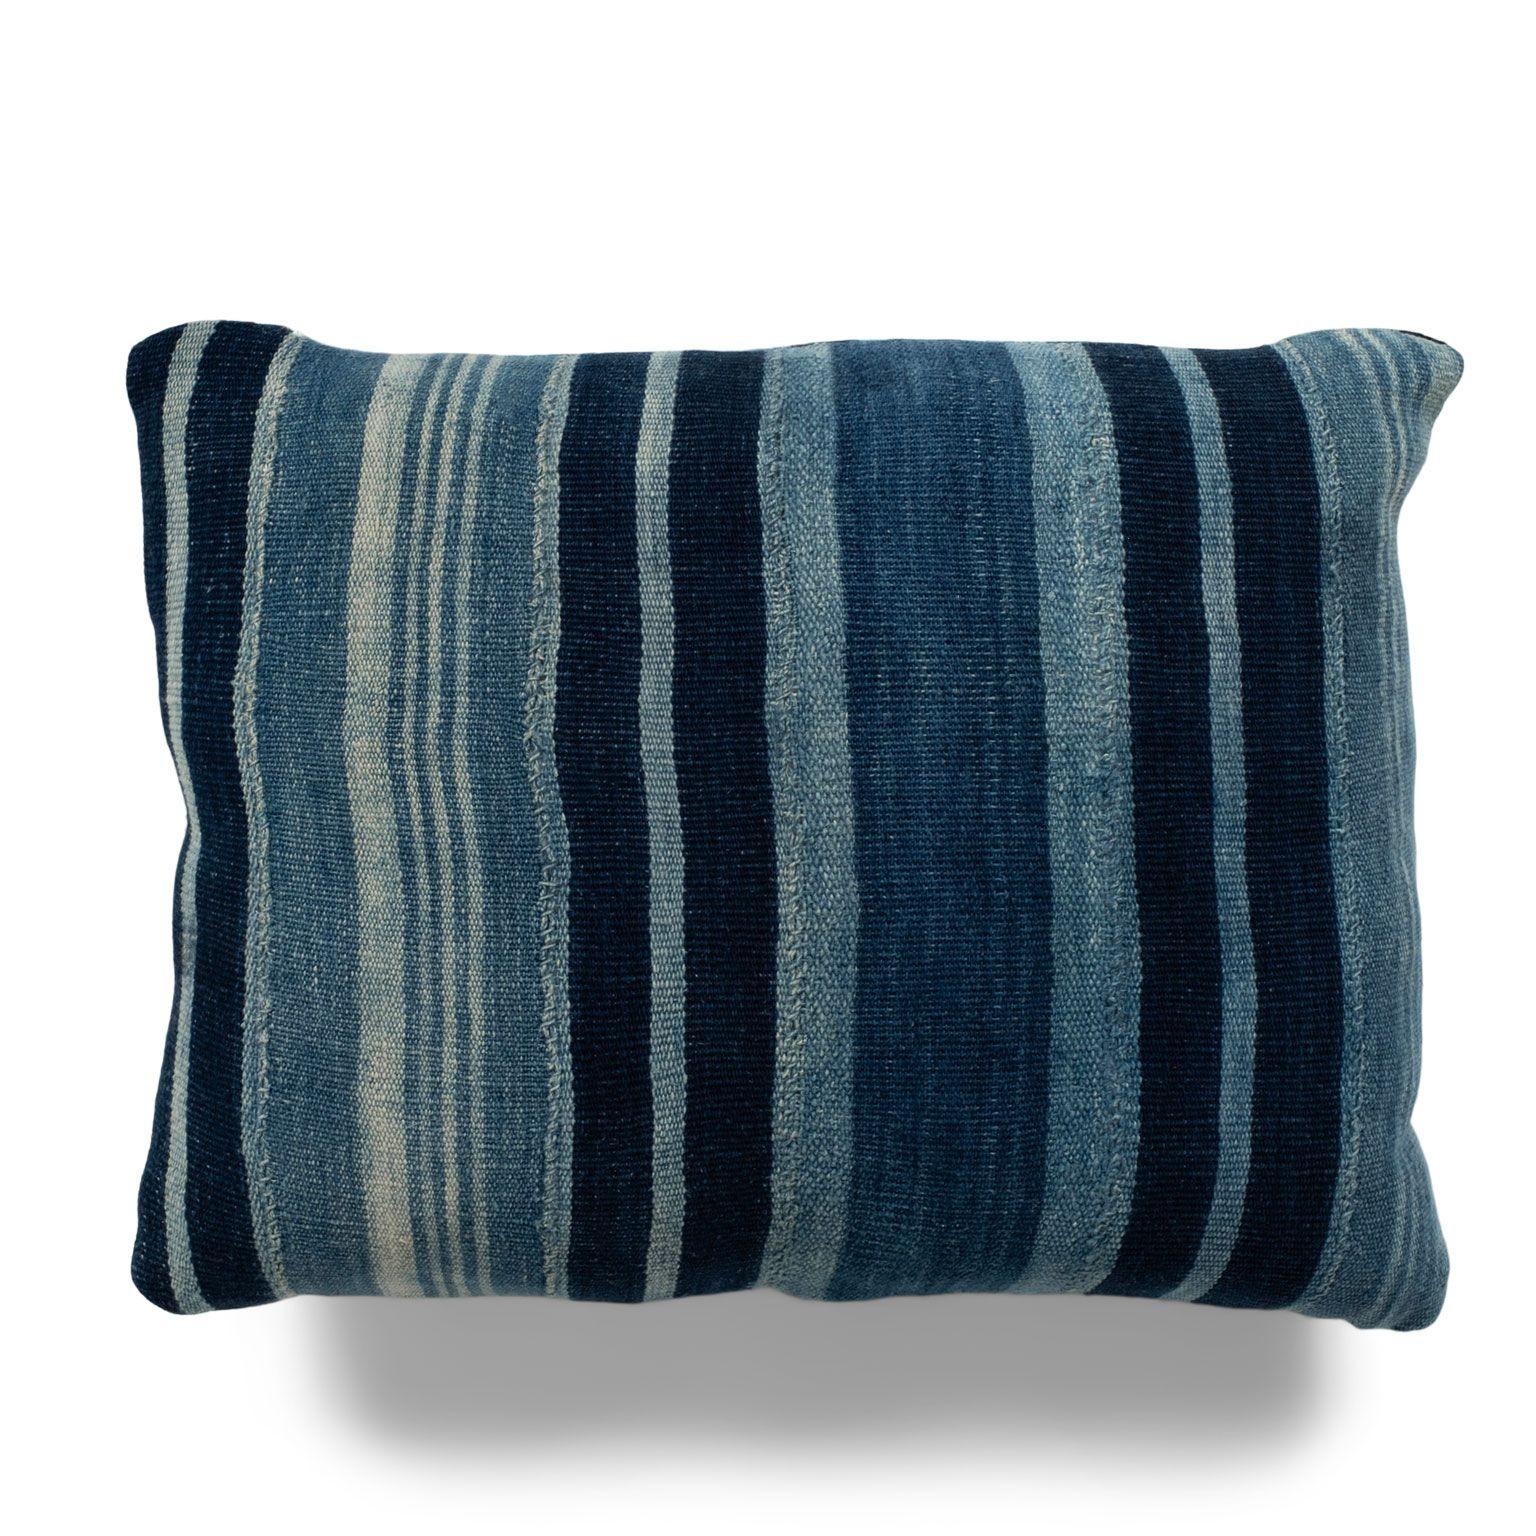 Rich faded indigo stripe cushion made from vintage handwoven and hand-dyed slubby cotton fabric. This decorative pillow includes a zip fastener and feather insert. Two available. Sold separately and priced $480 each.